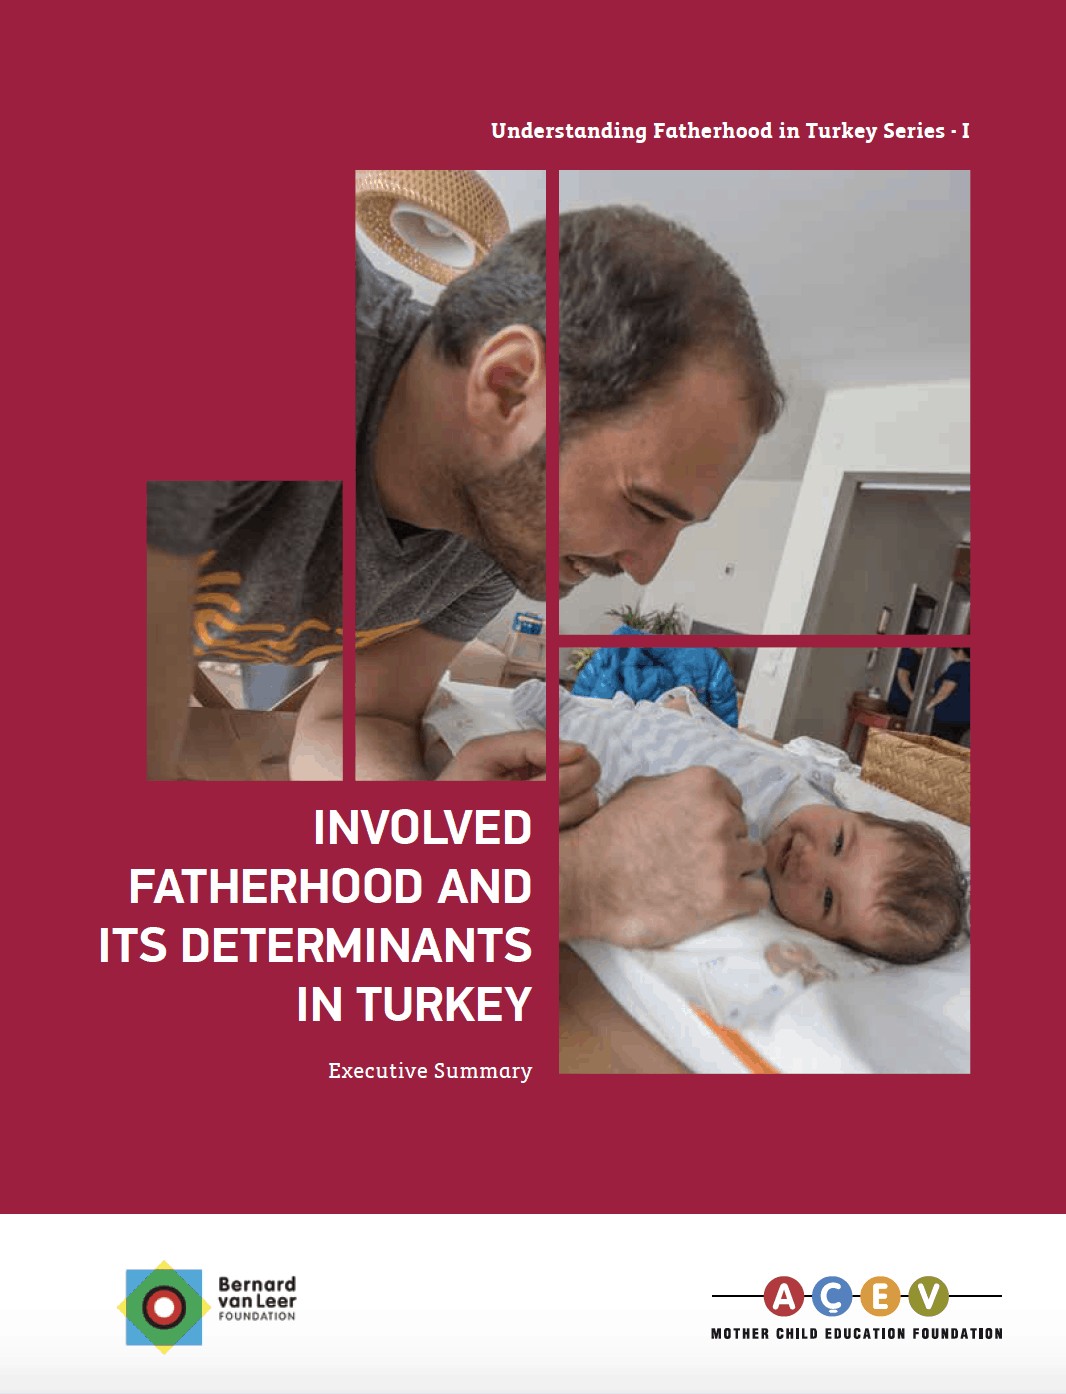 Involved Fatherhood and Its Determinants in Turkey